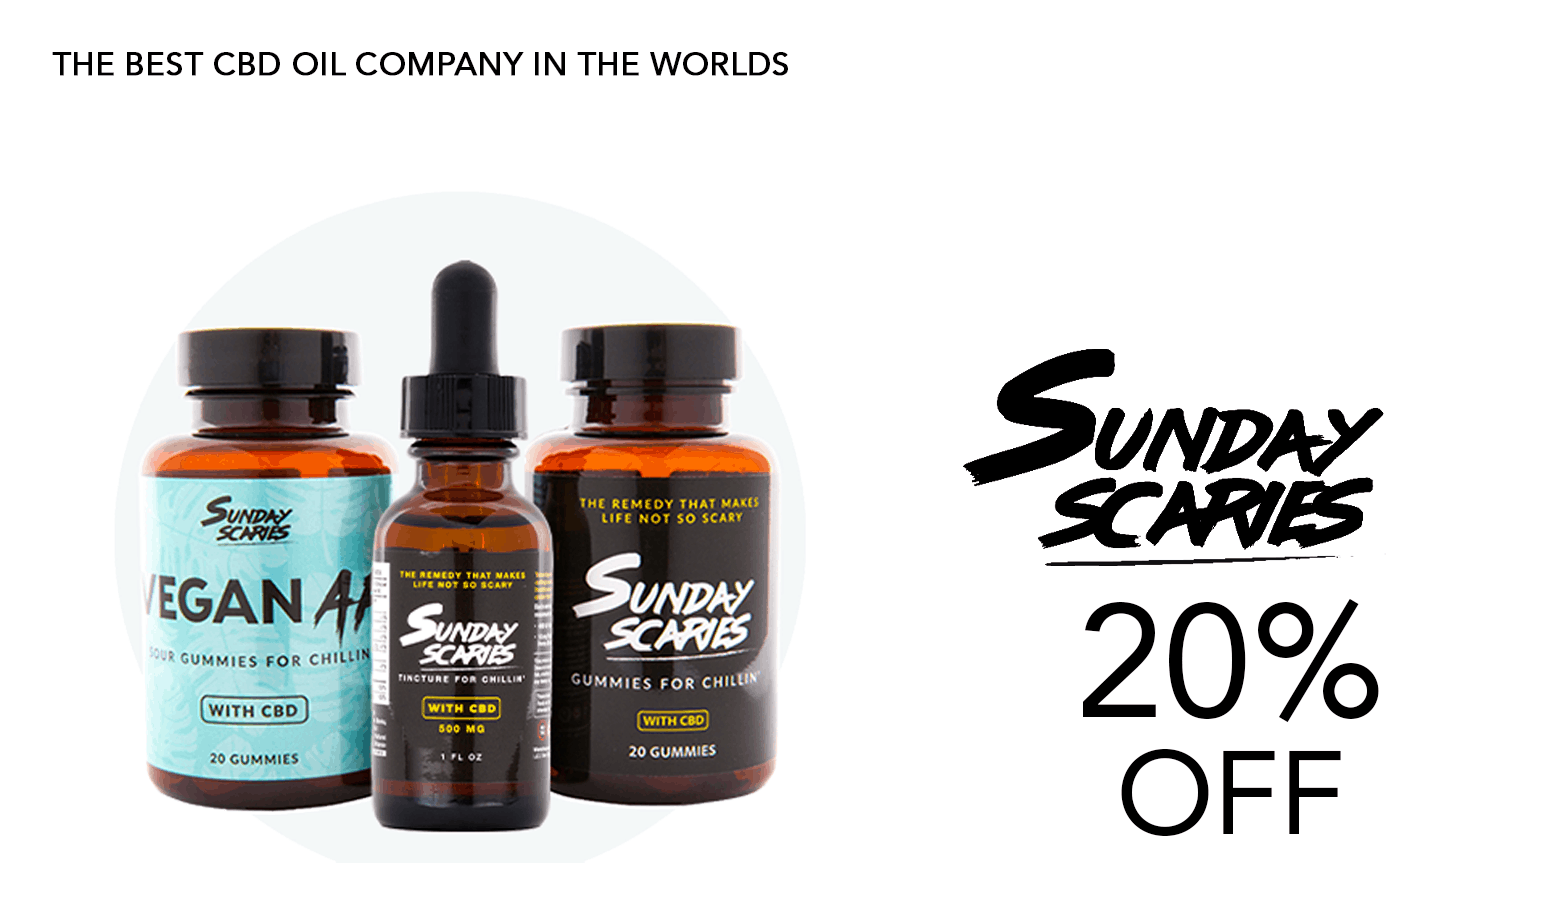 Sunday Scaries Coupon Code